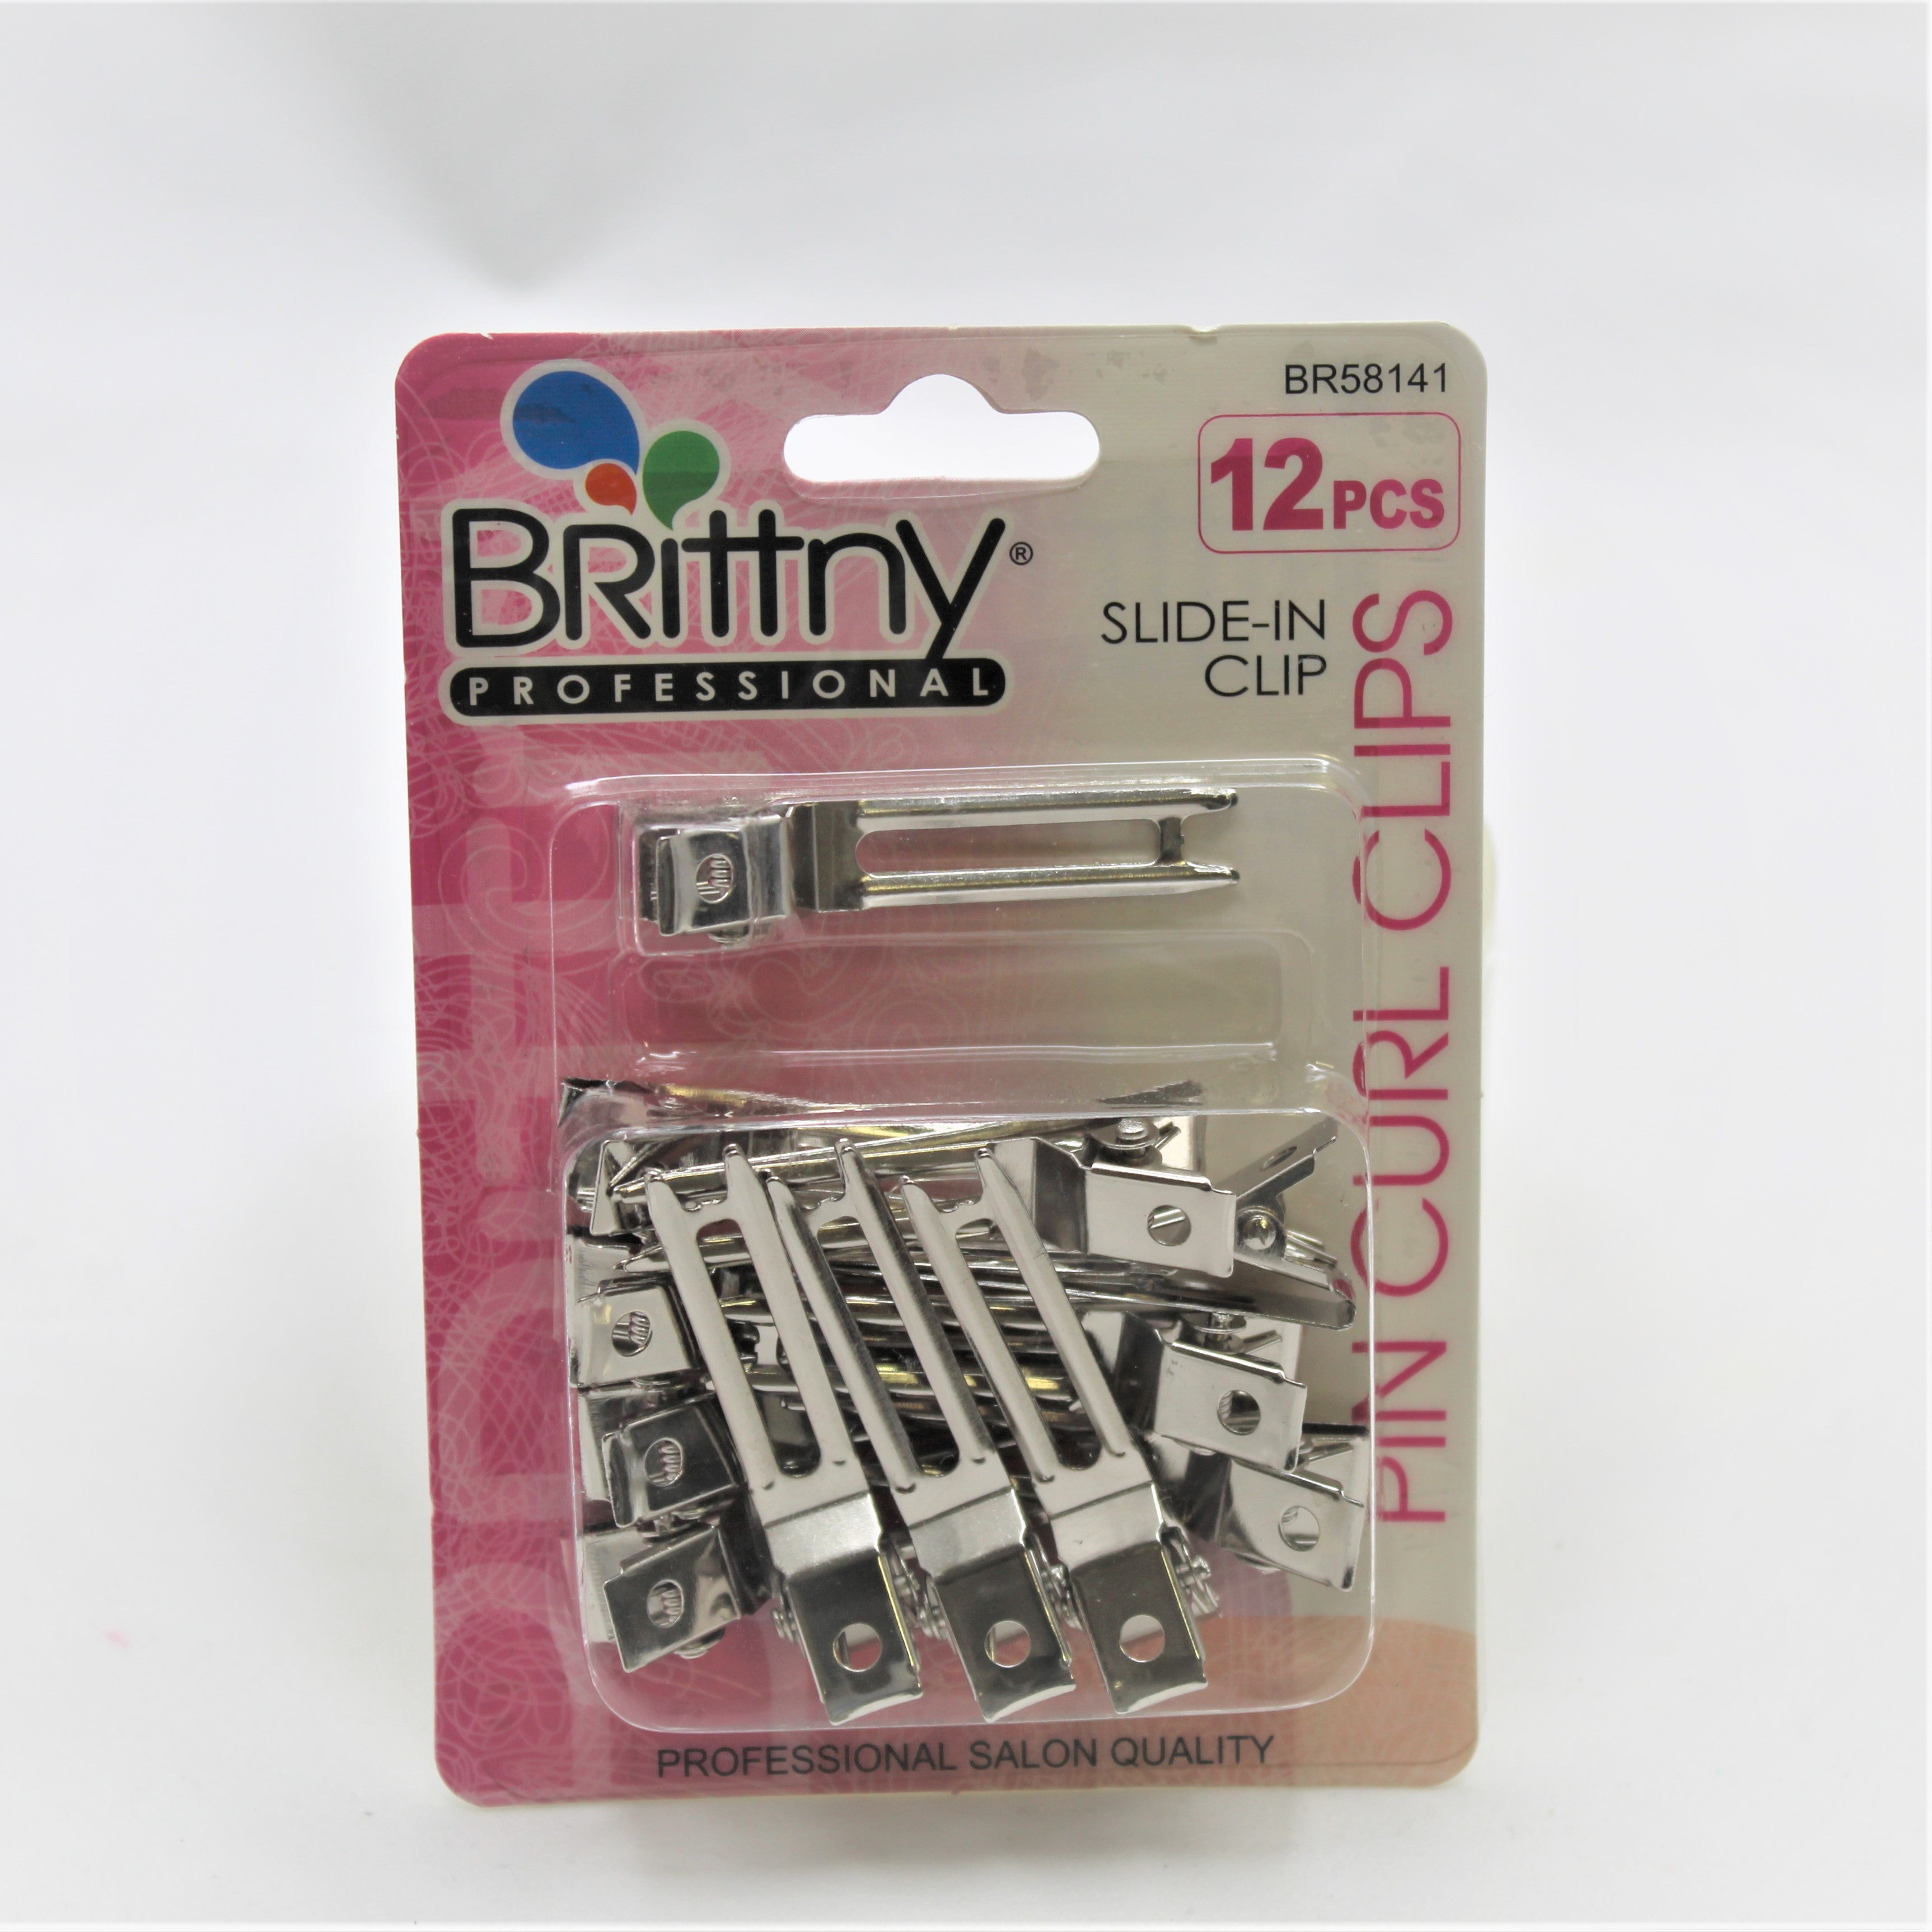 Brittny Slide In Pin Curl Clips BR58141 - Beauty Bar & Supply